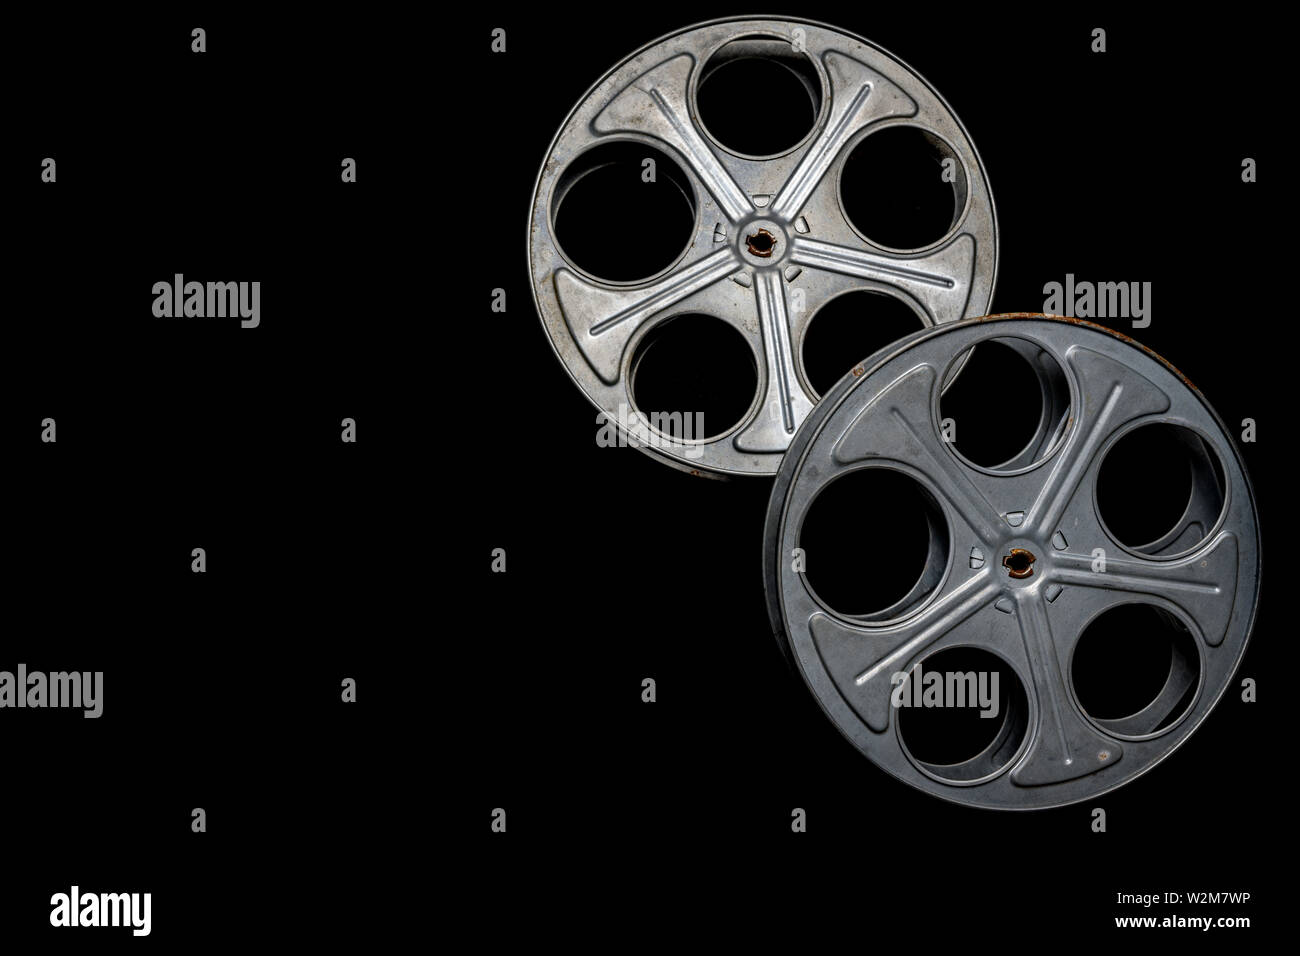 https://c8.alamy.com/comp/W2M7WP/two-vintage-film-reels-on-a-black-background-with-copy-space-W2M7WP.jpg